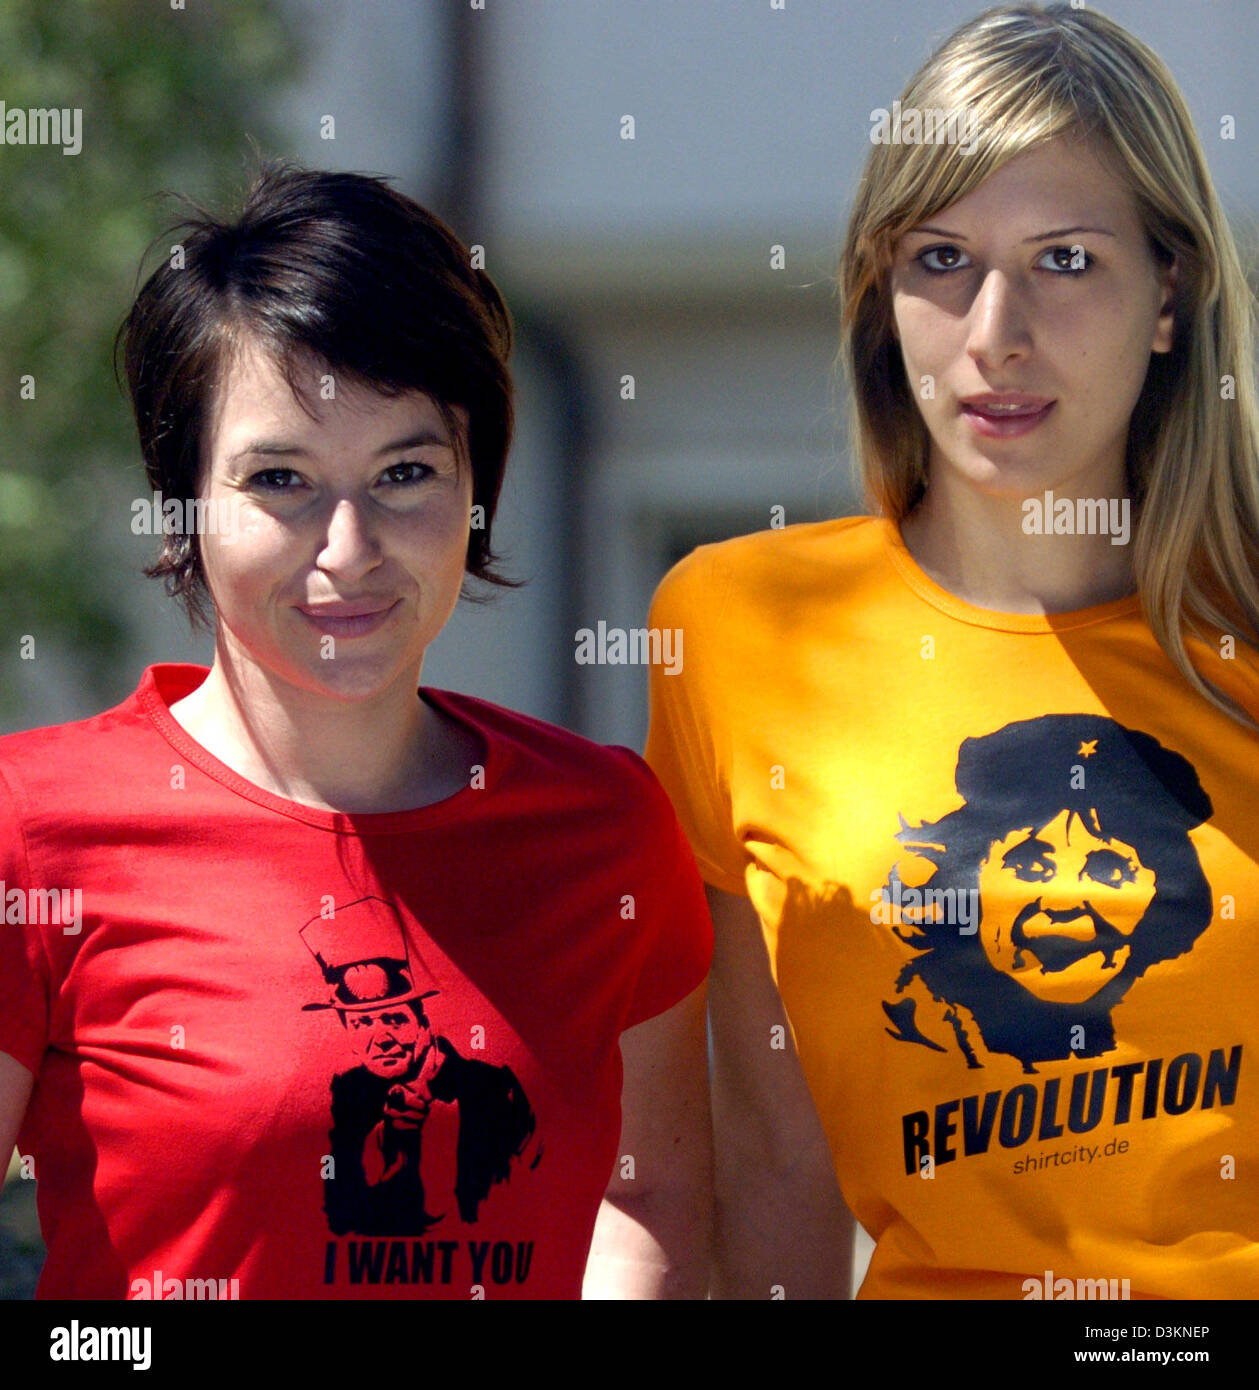 dpa) - Models Tanja (L) and Sabine present T-shirts with images of German  politicians Gerhard Schroeder (L) and Angela Merkel in Ulm, Germany, 1  August 2005. T-shirt producing company 'shirtcity' uses the